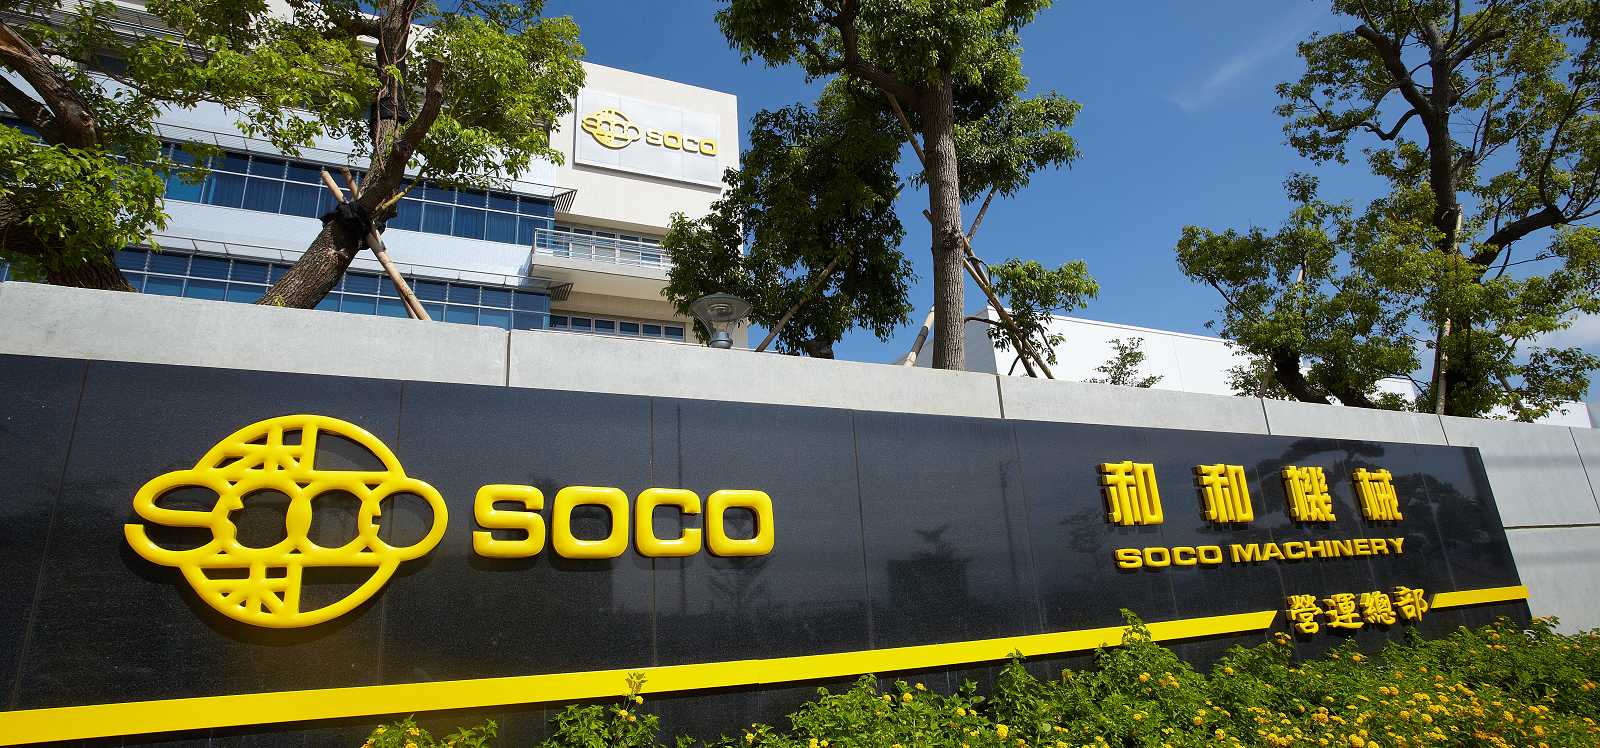 SOCO Headquarter for tube bending and laser cutting manufacturing